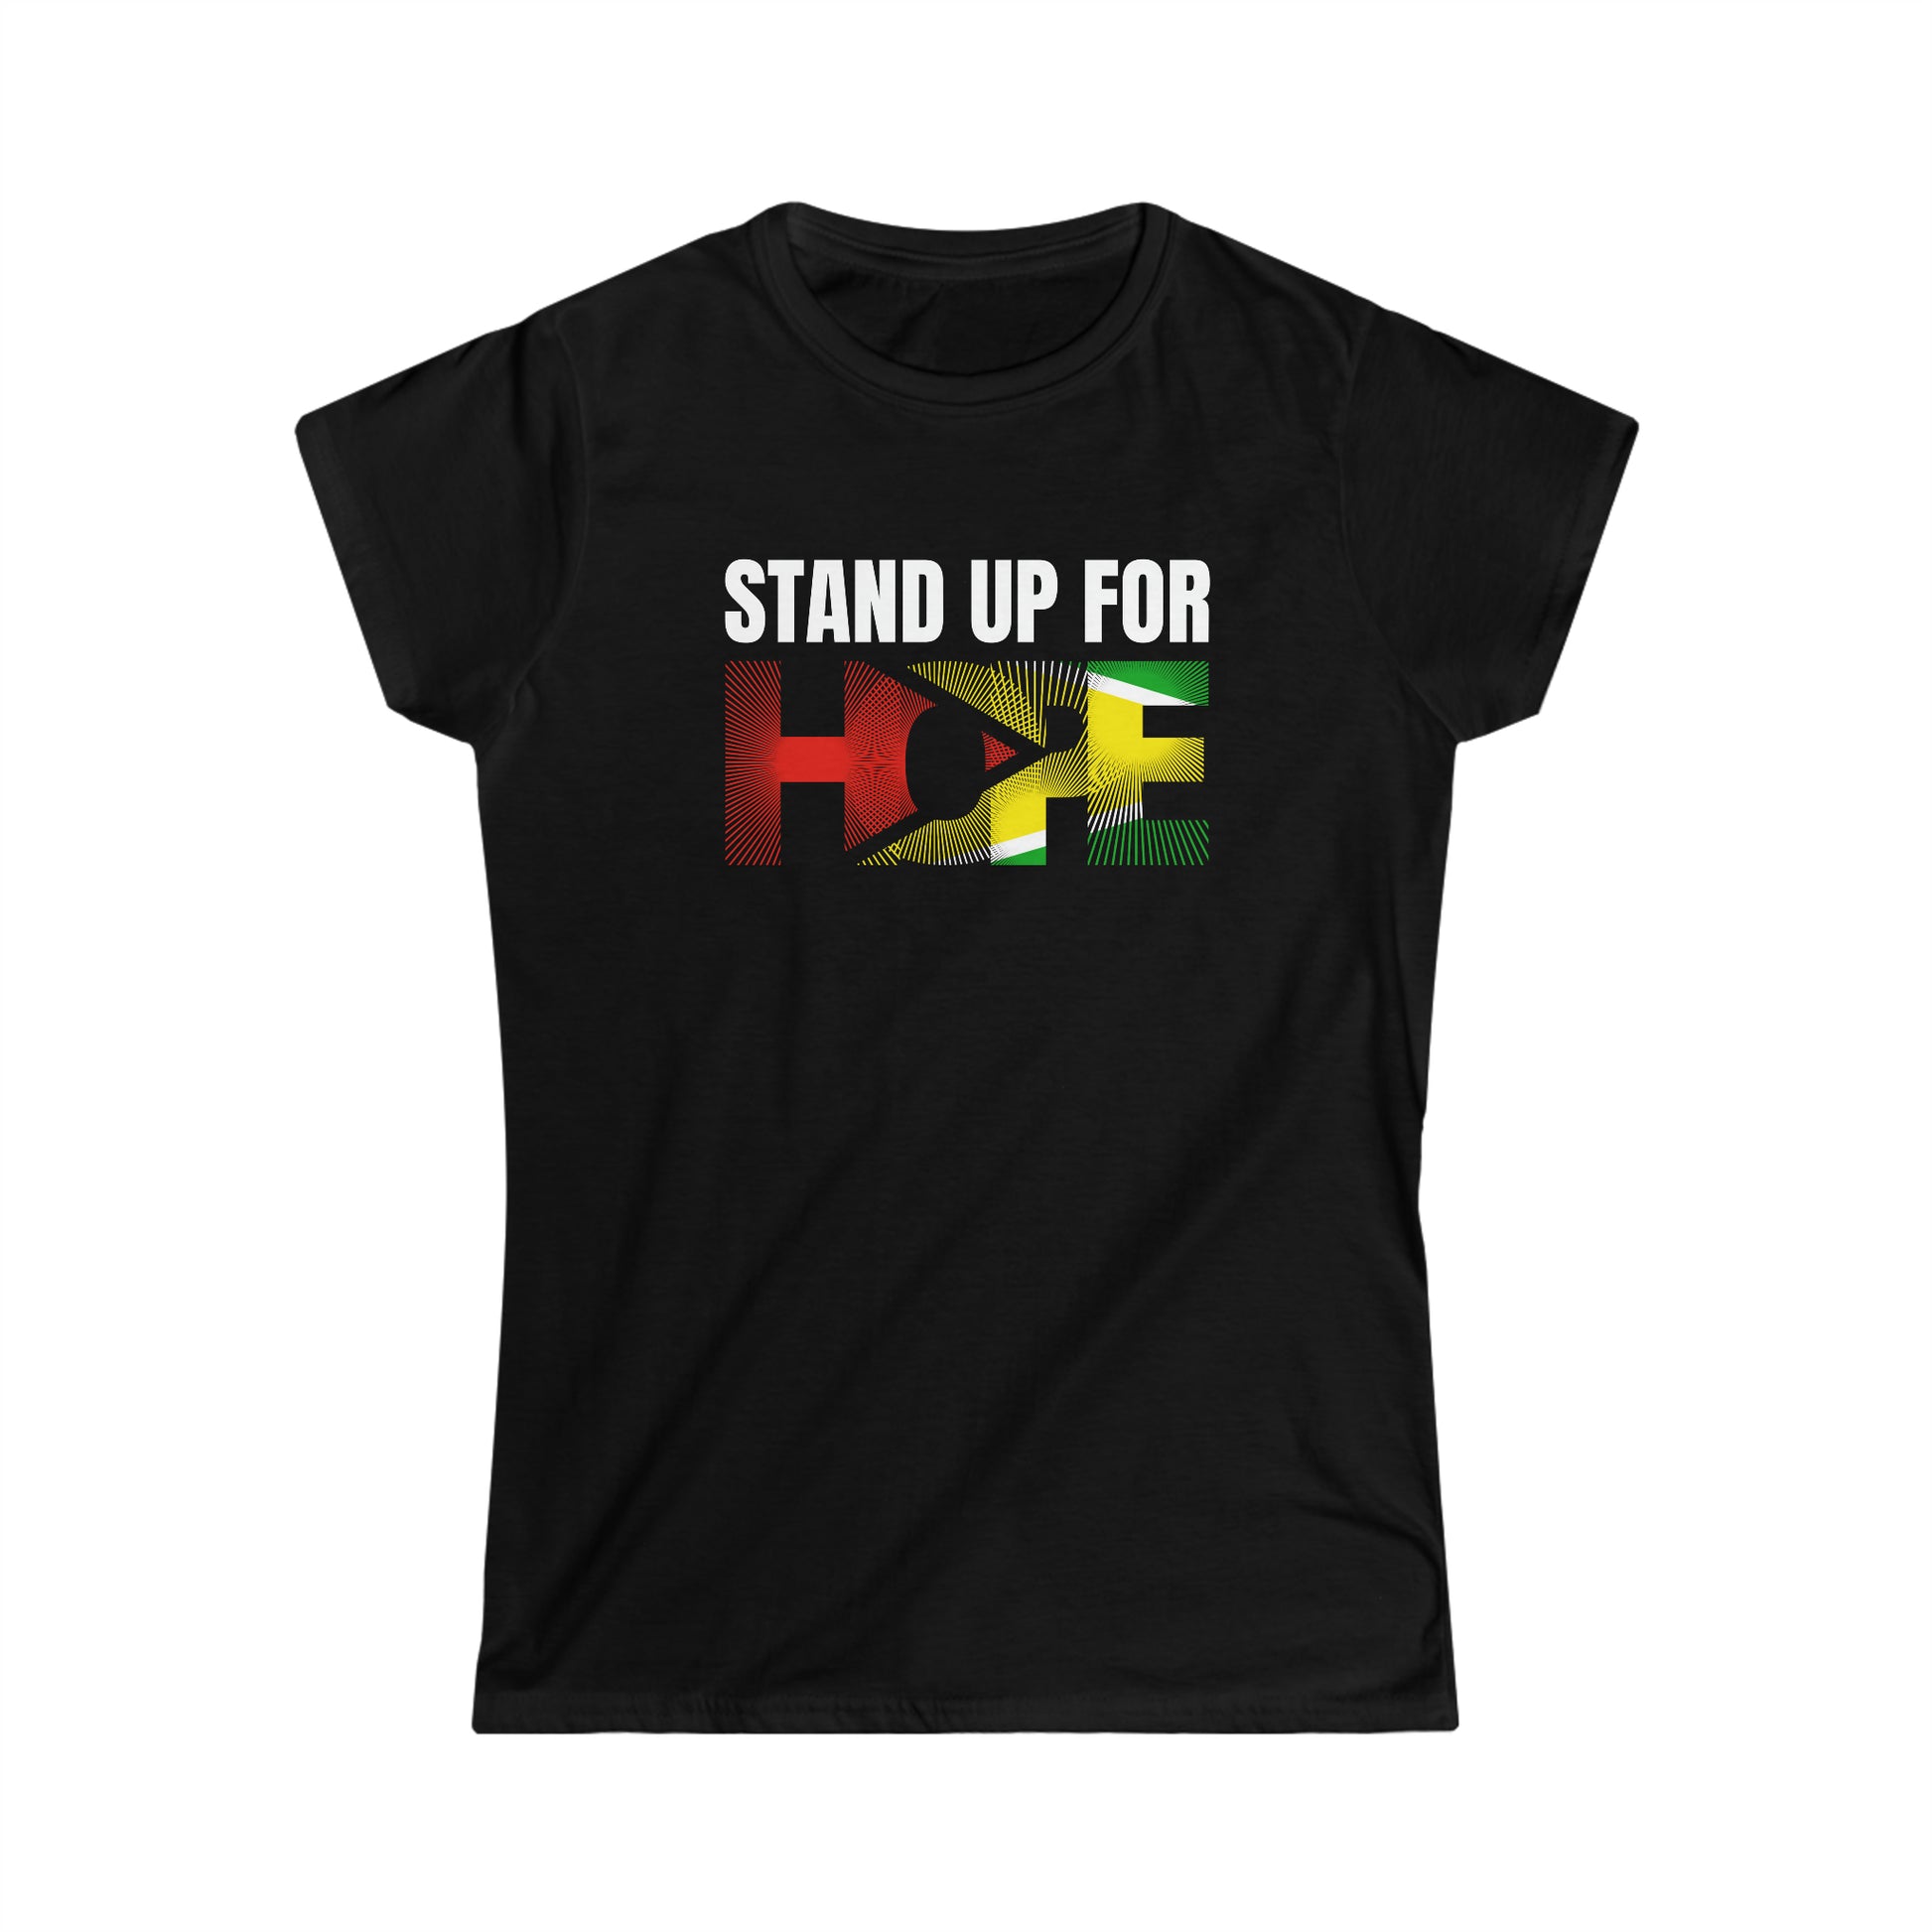 Stand Up For Hope Women's Softstyle Guyanese Swag Sexual Abuse Awareness Tee